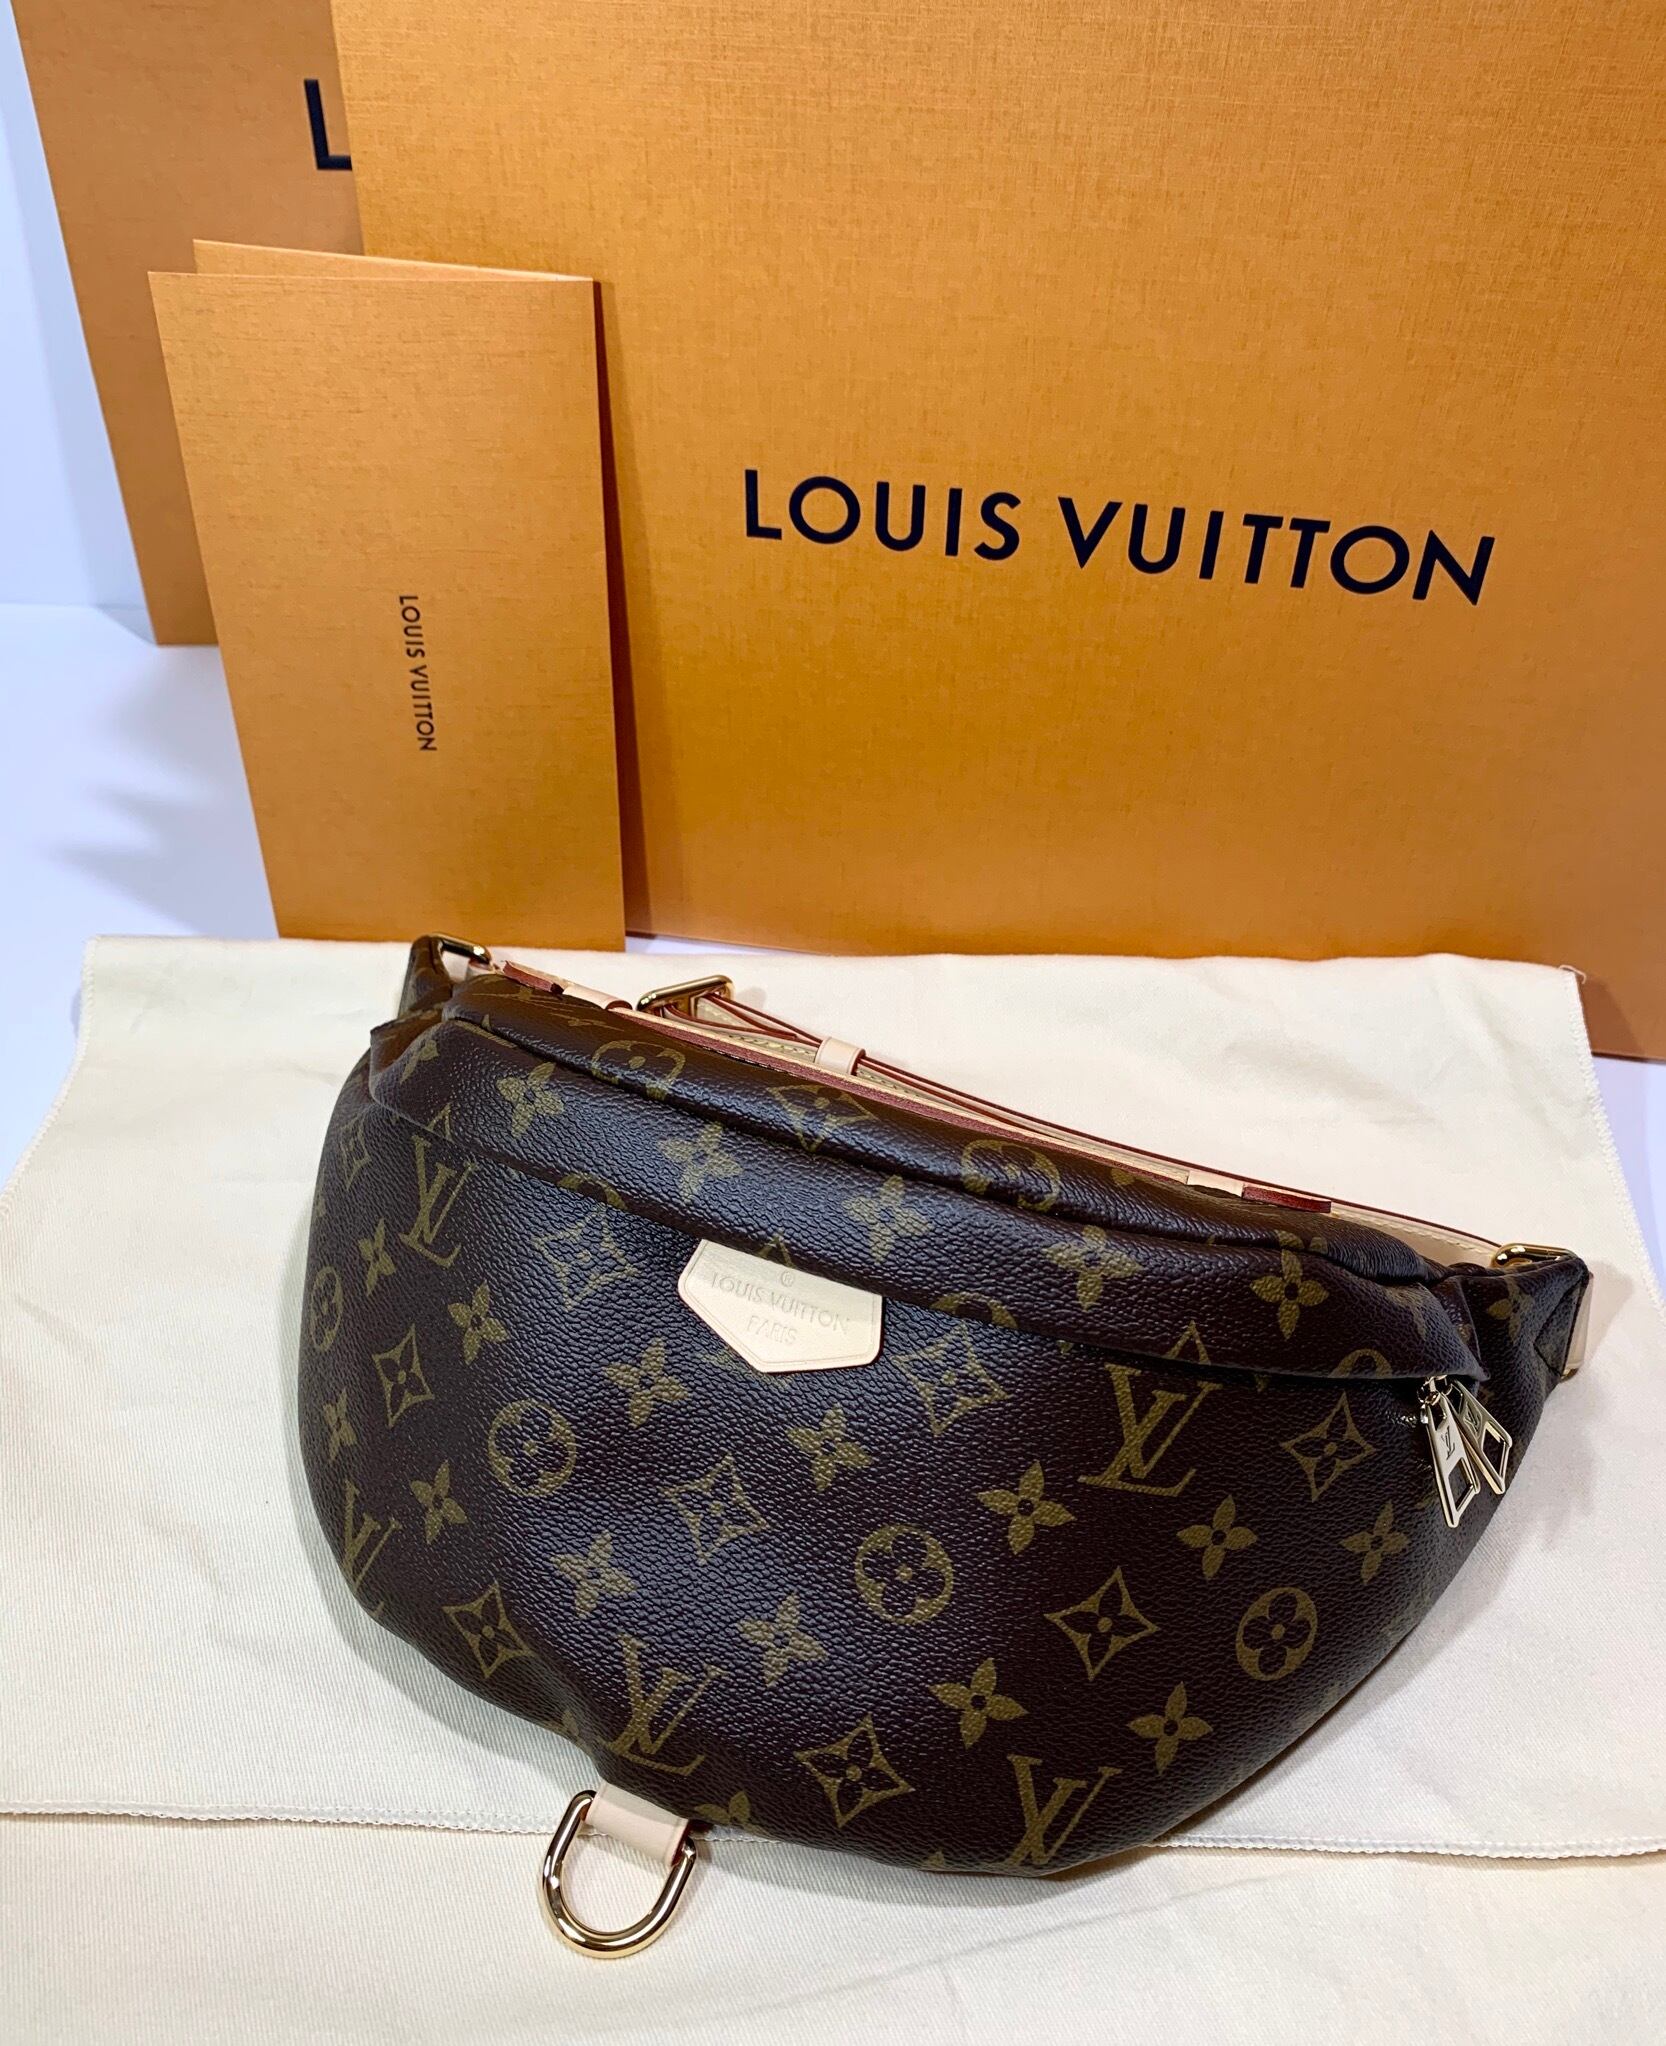 LOUIS VUITTON ルイヴィトン モノグラムバムバッグ/M43644 | CrocorO.coc powered by BASE